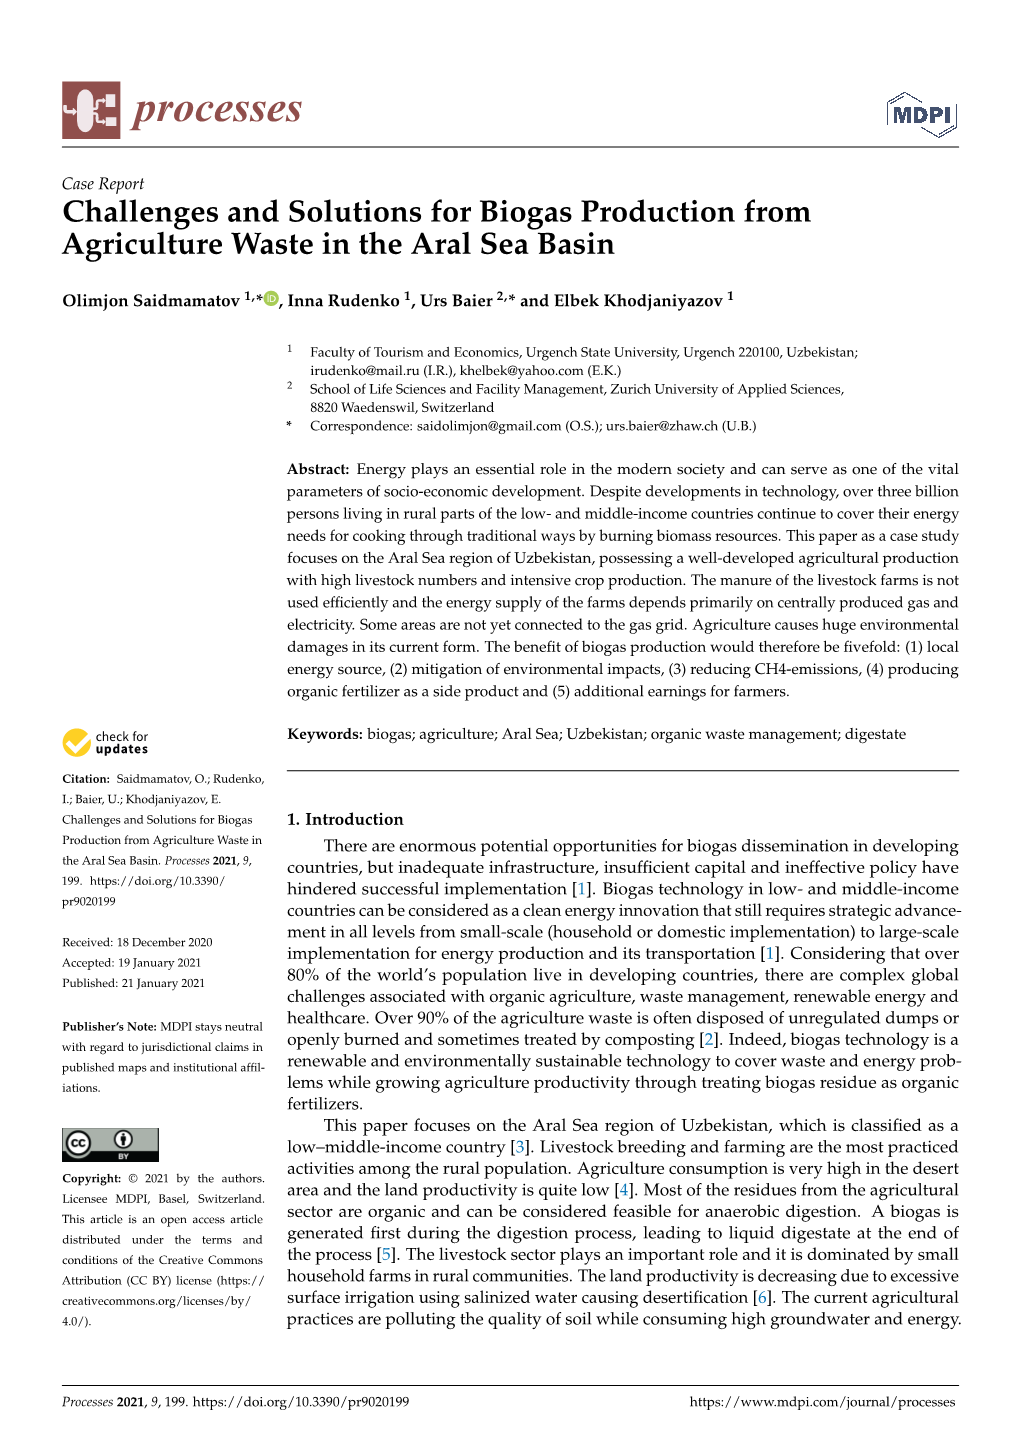 Challenges and Solutions for Biogas Production from Agriculture Waste in the Aral Sea Basin